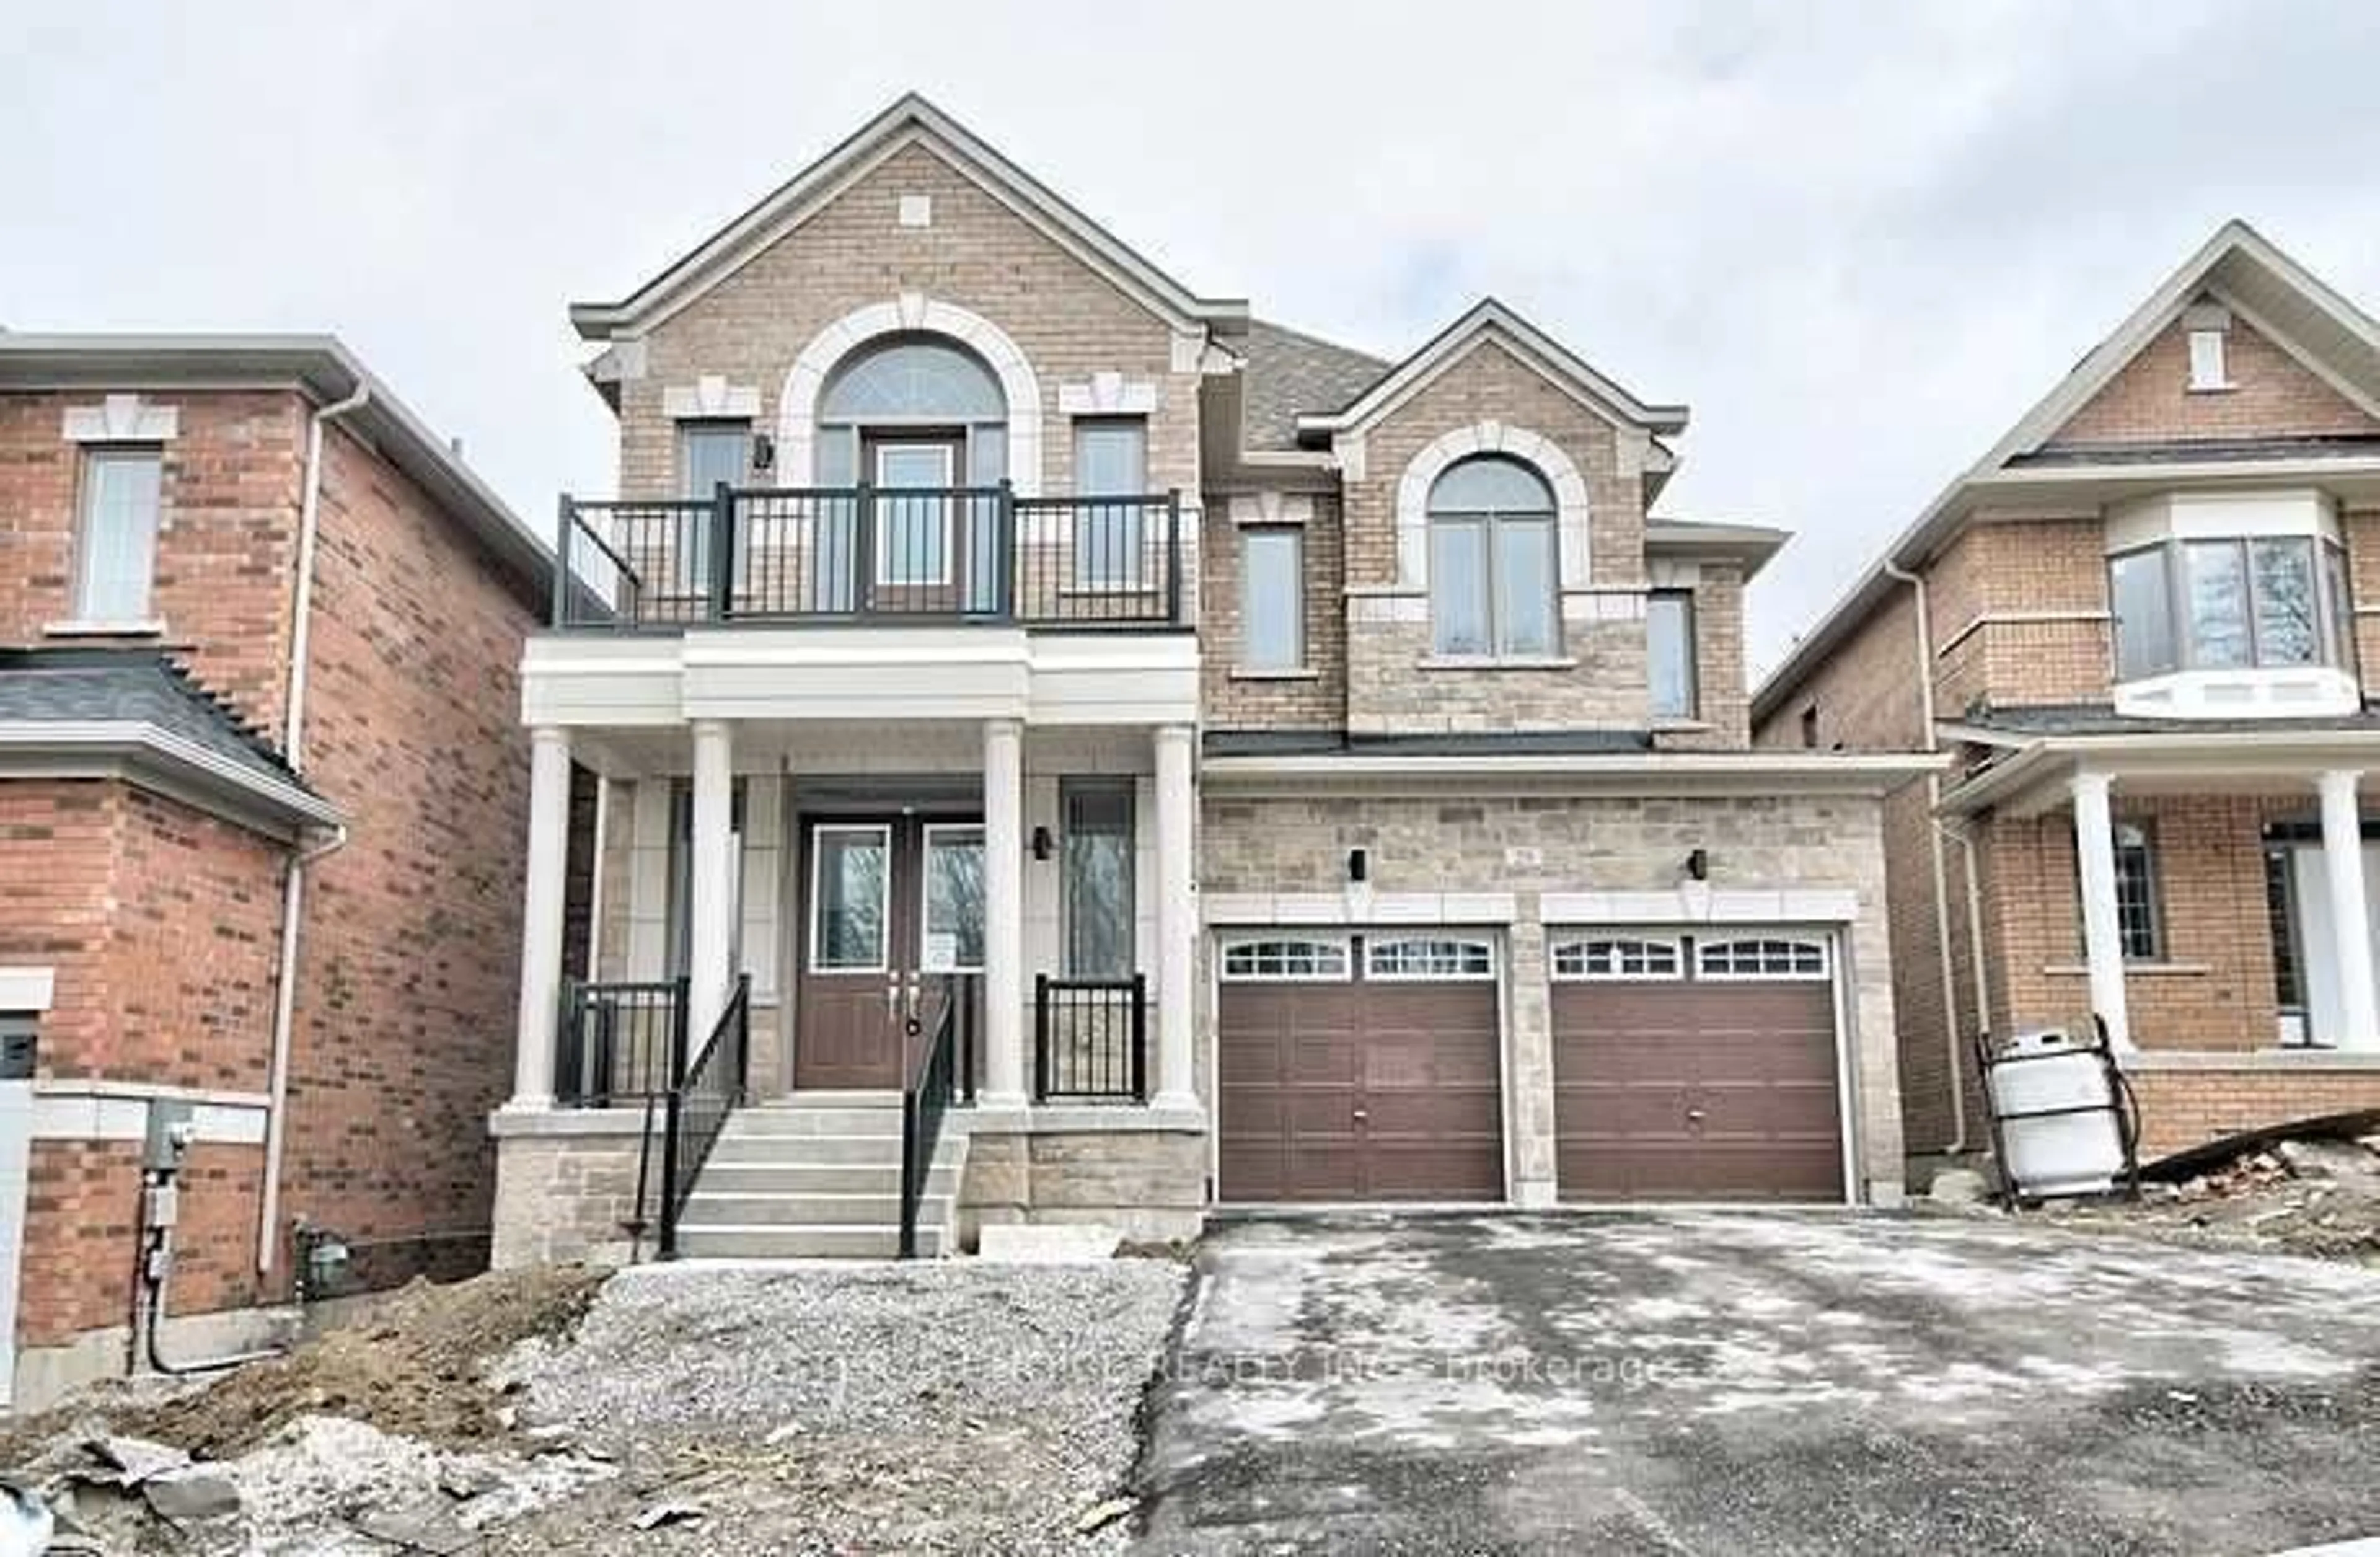 Home with brick exterior material for 29 Charlotte Abby Dr, East Gwillimbury Ontario L9N 0T1